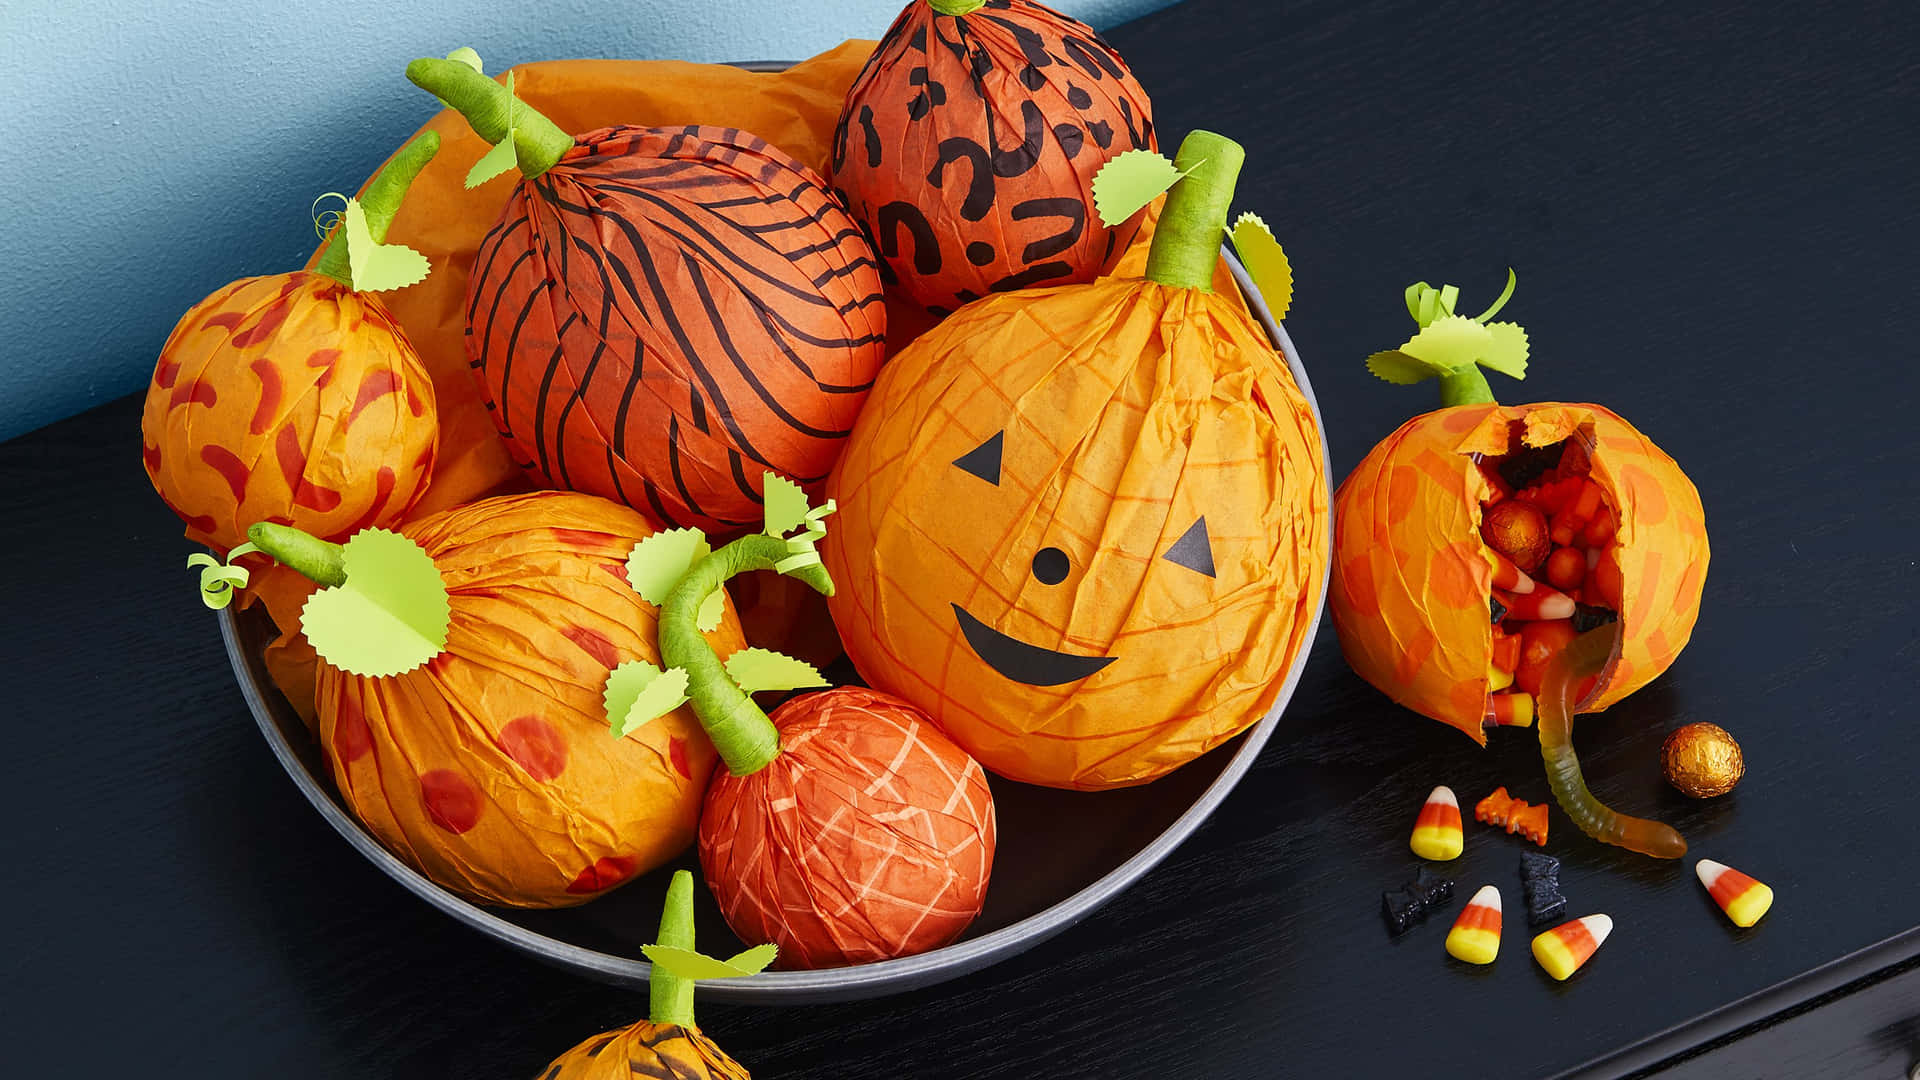 Create your scariest Halloween props with these eerie items!" Wallpaper